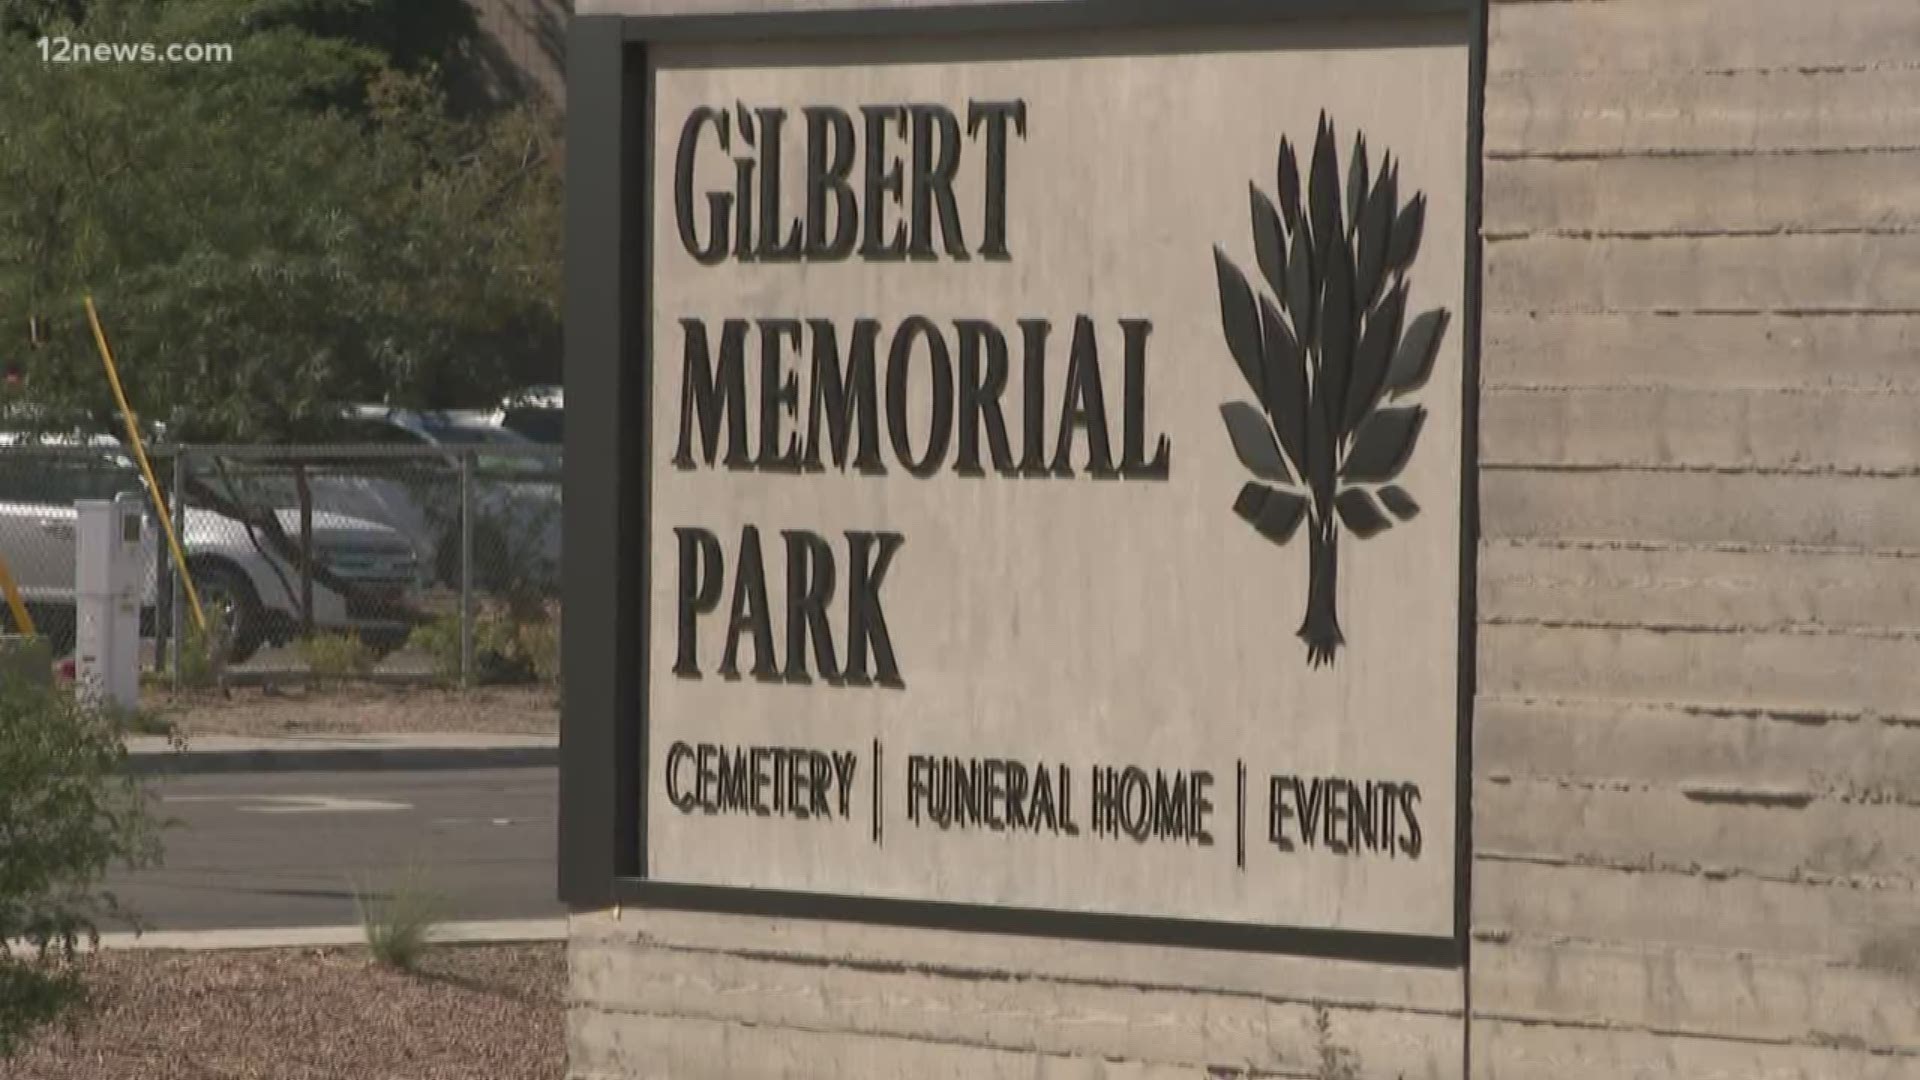 Gilbert has a brand new addition to the town. The first ever cemetery is now open to people who want to rest in peace closer to home.